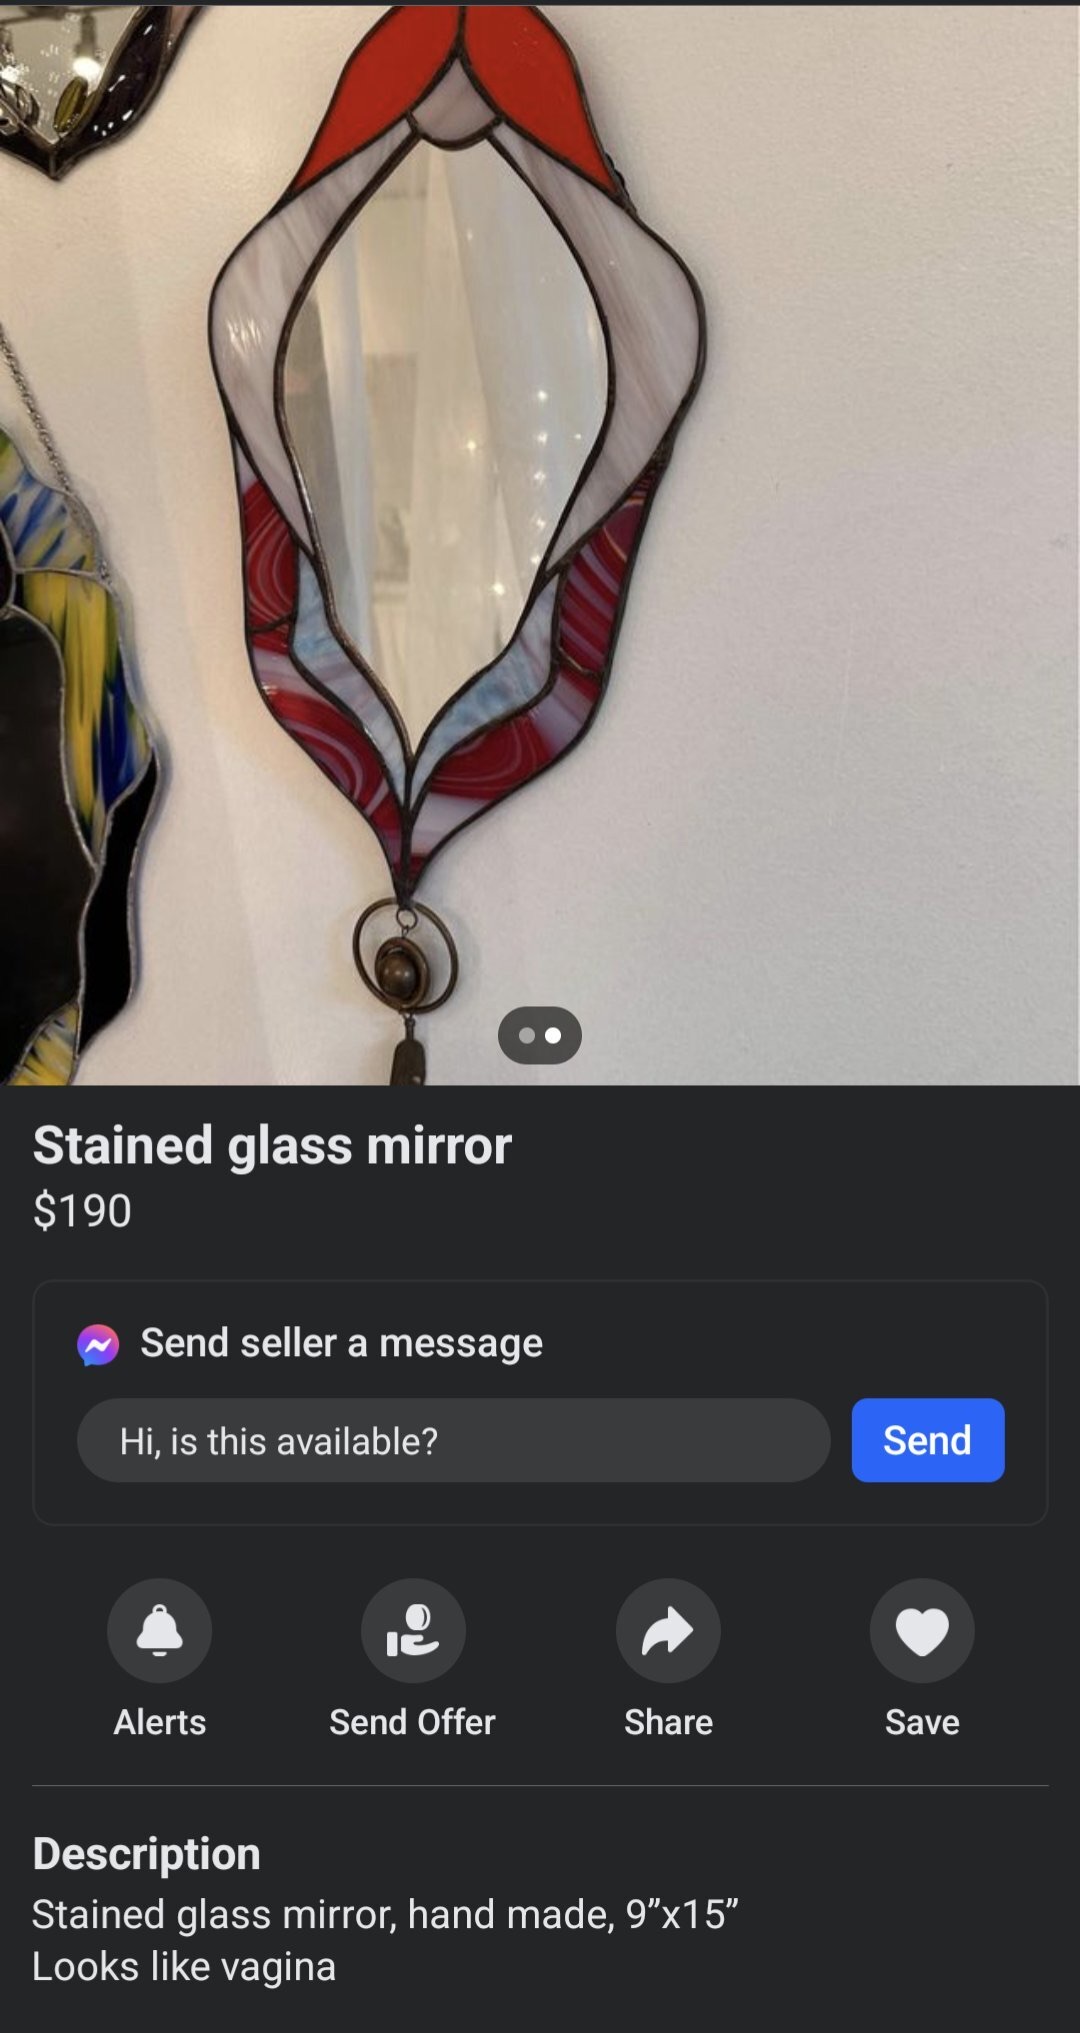 20 Supreme Facebook Marketplace Finds That Are Totally Not Worth It